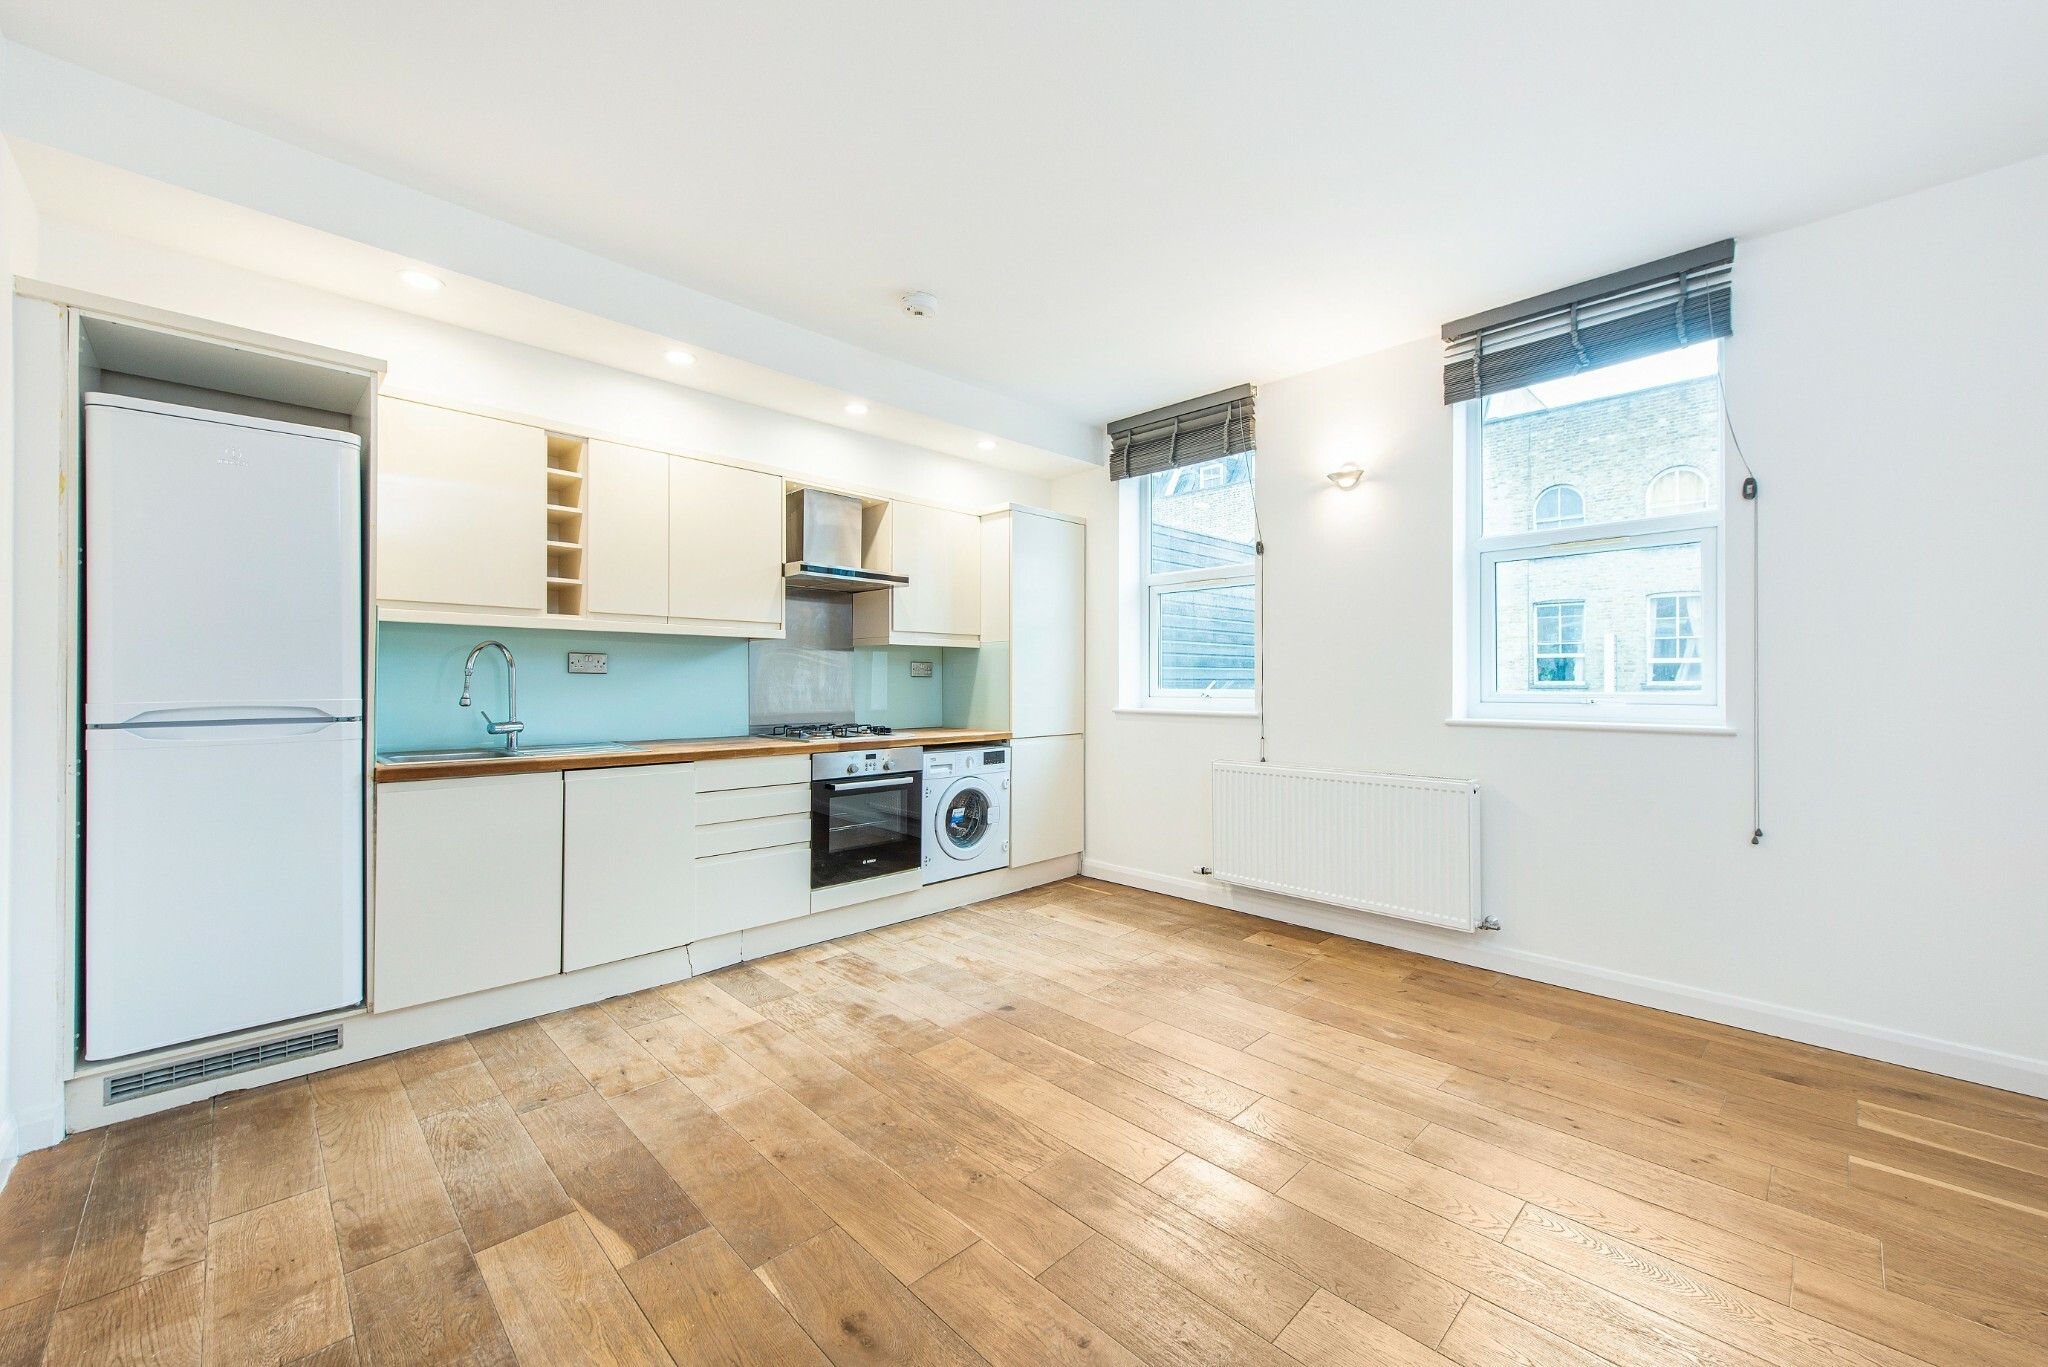 1 bed flat to rent in Well Street, London E9 - Zoopla